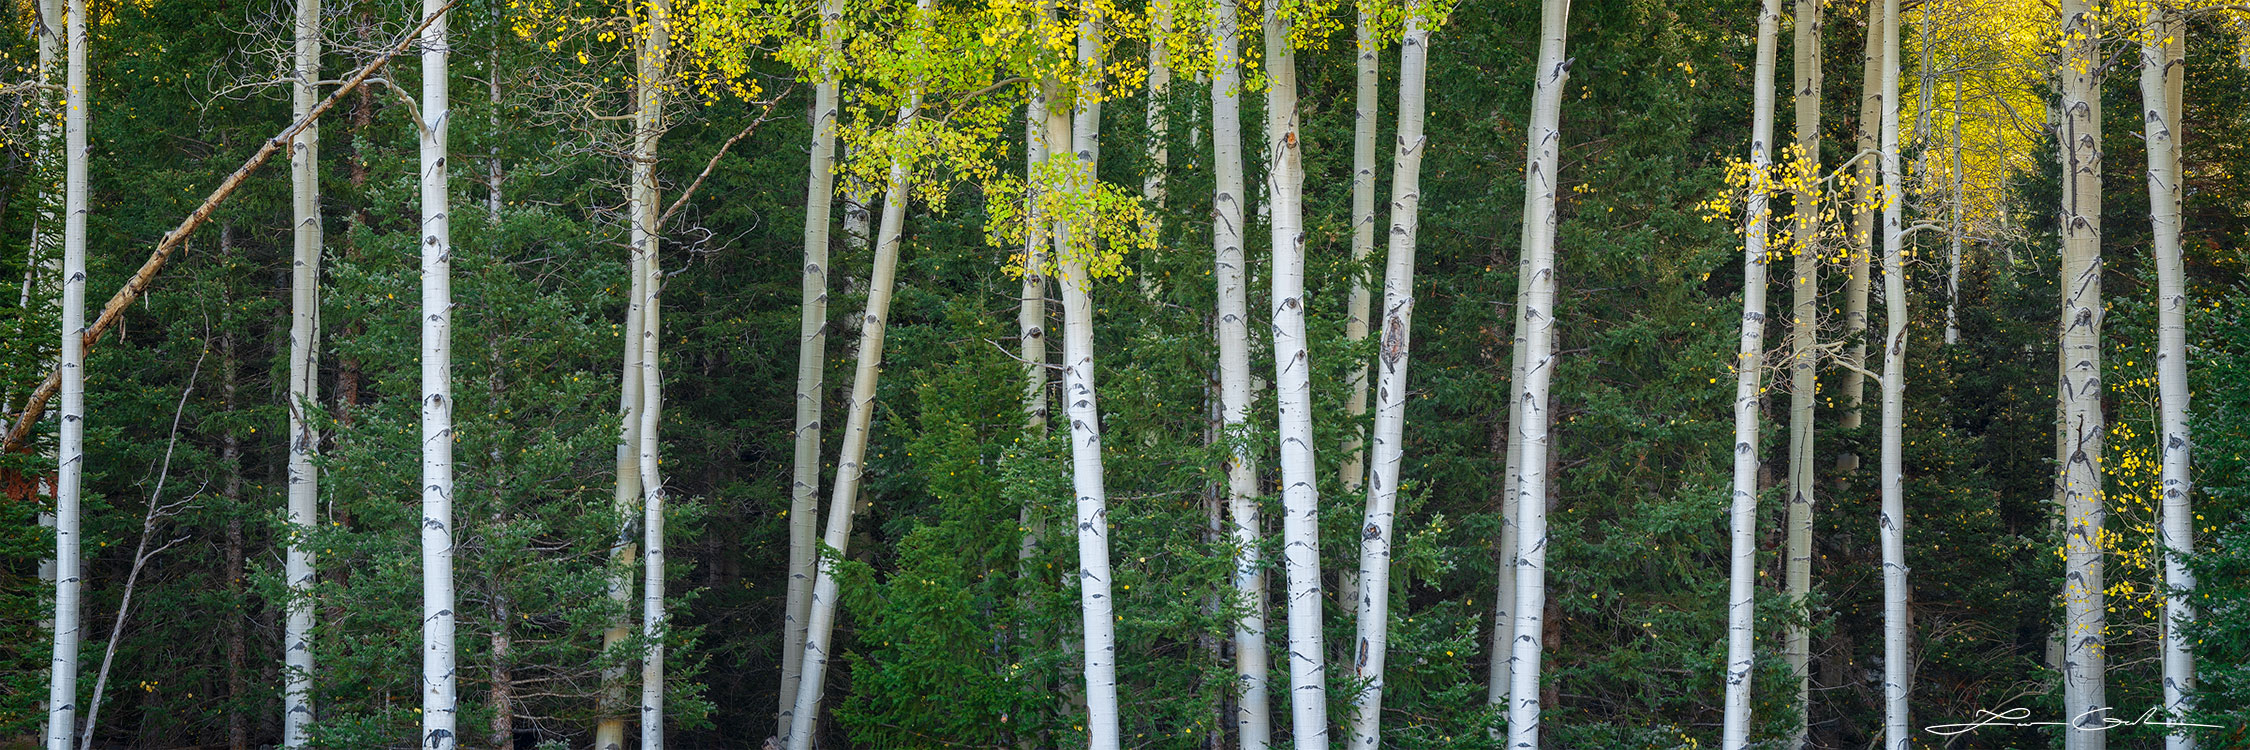 A delightful merging of aspen trunks and pinewood creates a delicate mesh of trees - Gintchin Fine Art